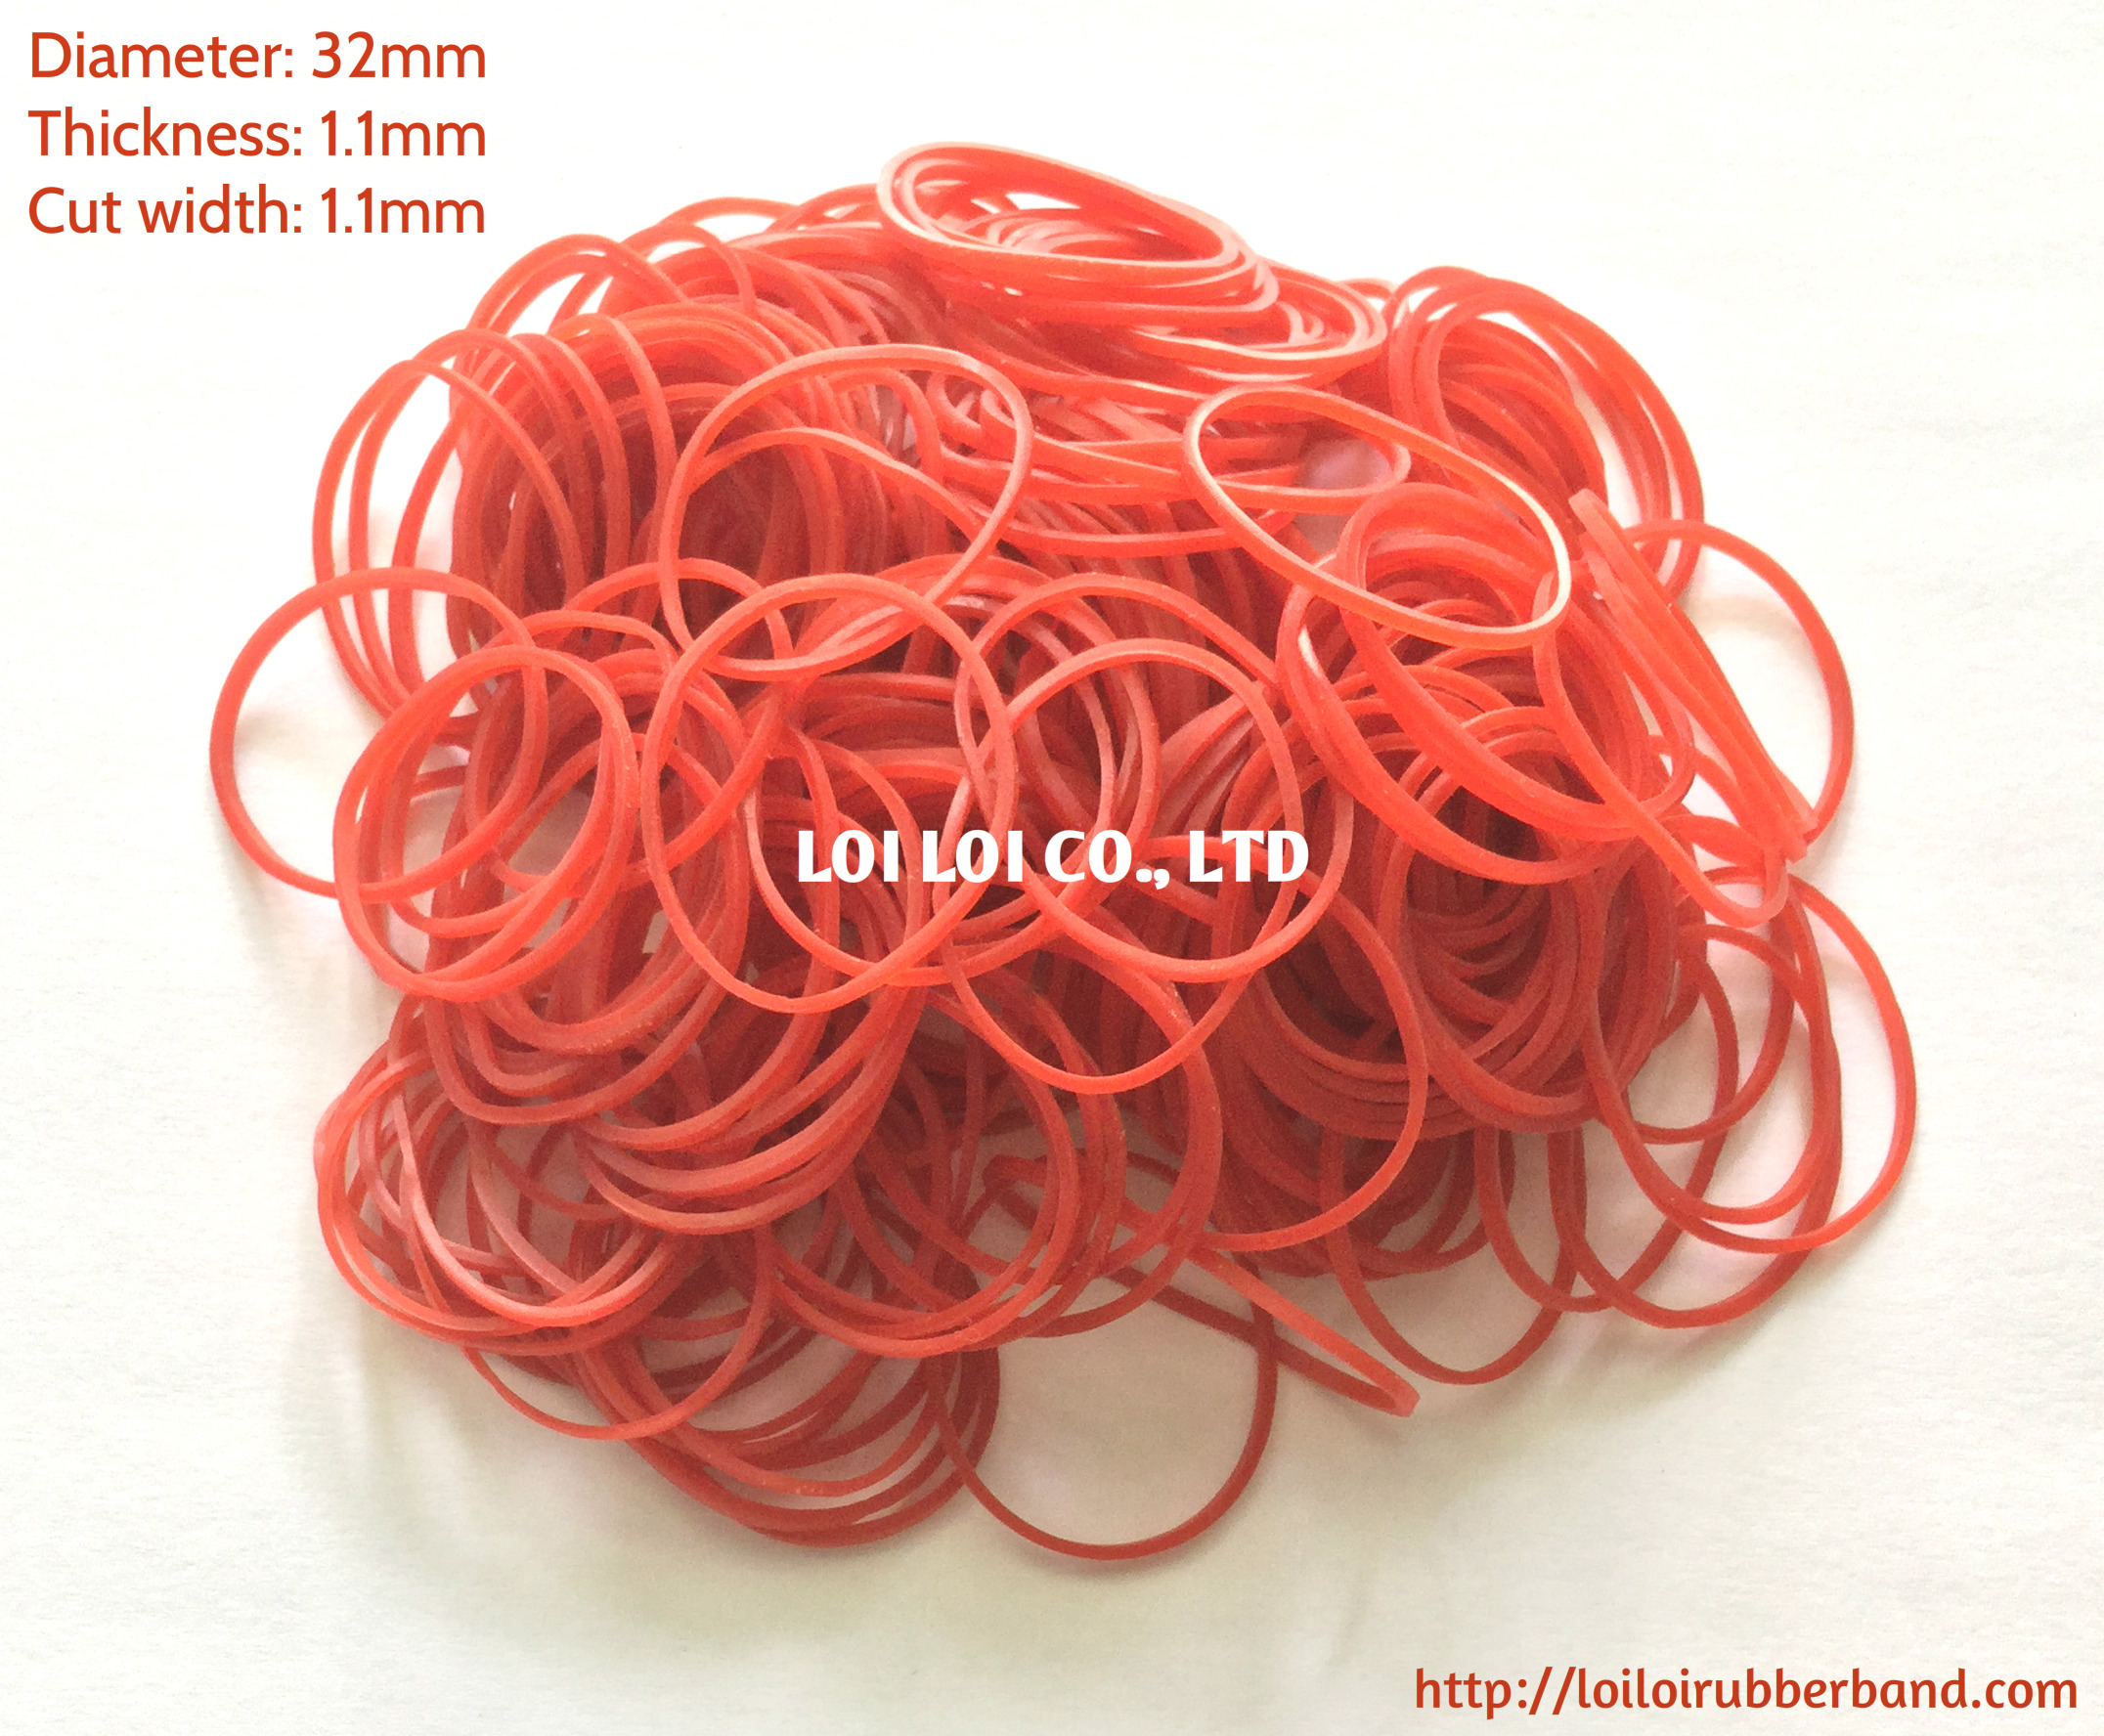 Red colour Thin Rubber Band good use for Gloves and other purposes